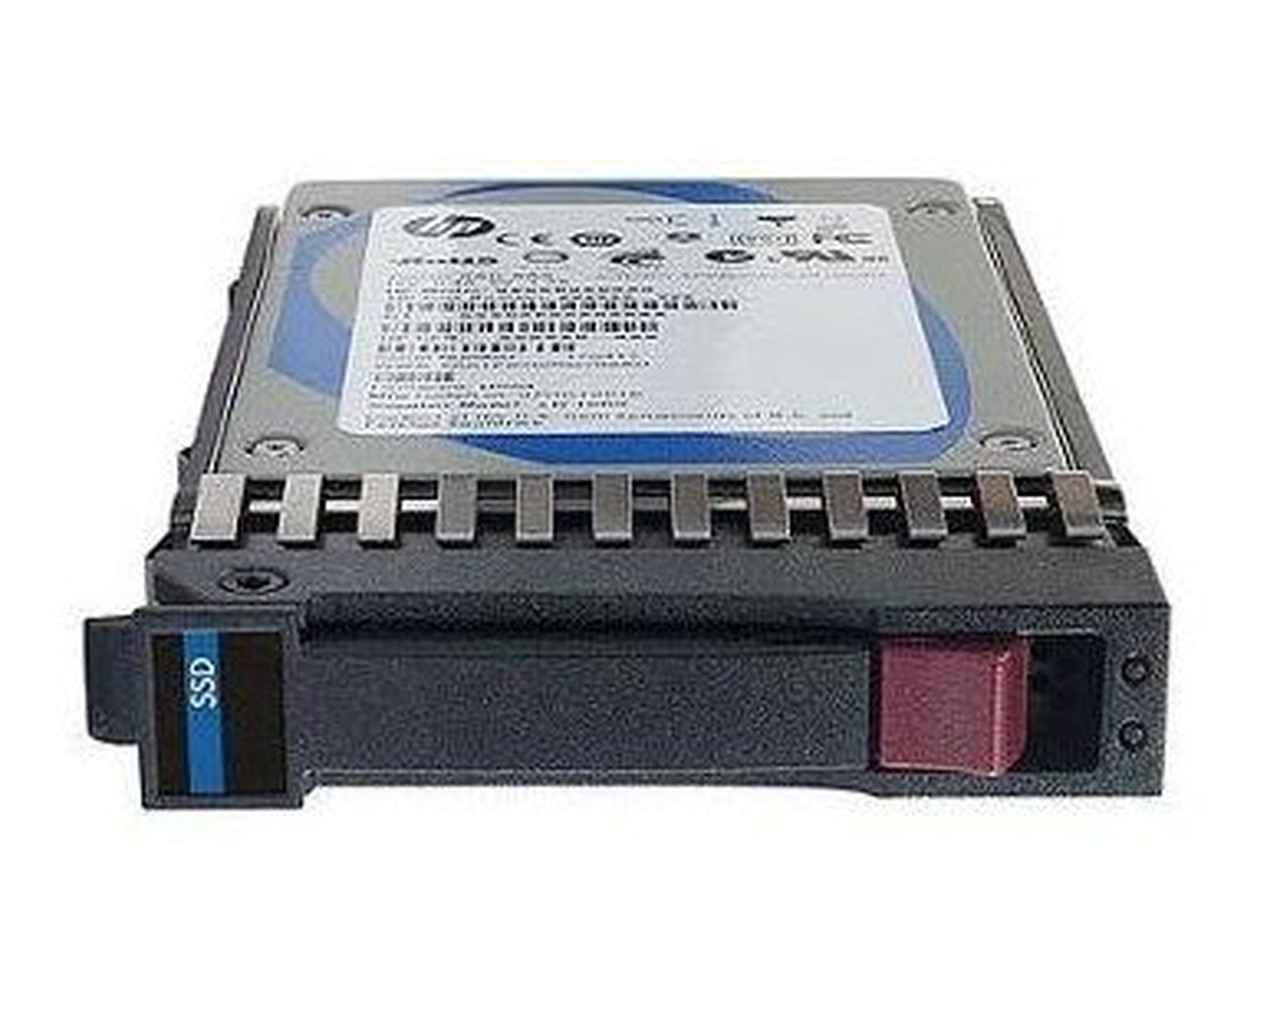 HP N9X96A 800GB Multi-Level-Cell SAS 12Gb/s 2.5-inch Solid State Drive for ProLiant GEN9 and GEN10 Servers